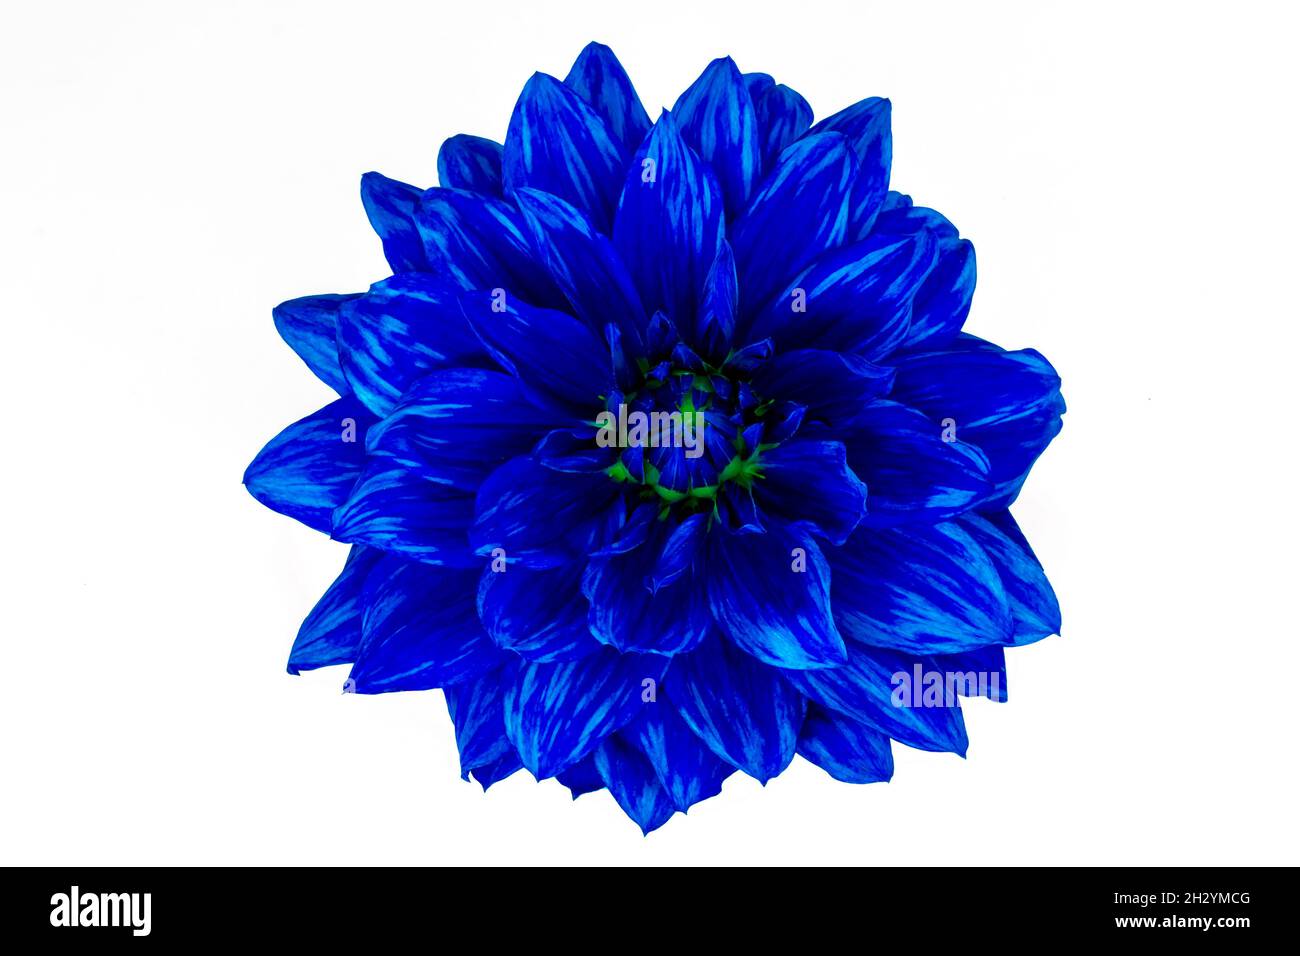 Head of blue flower isolate on a white background close-up Stock Photo